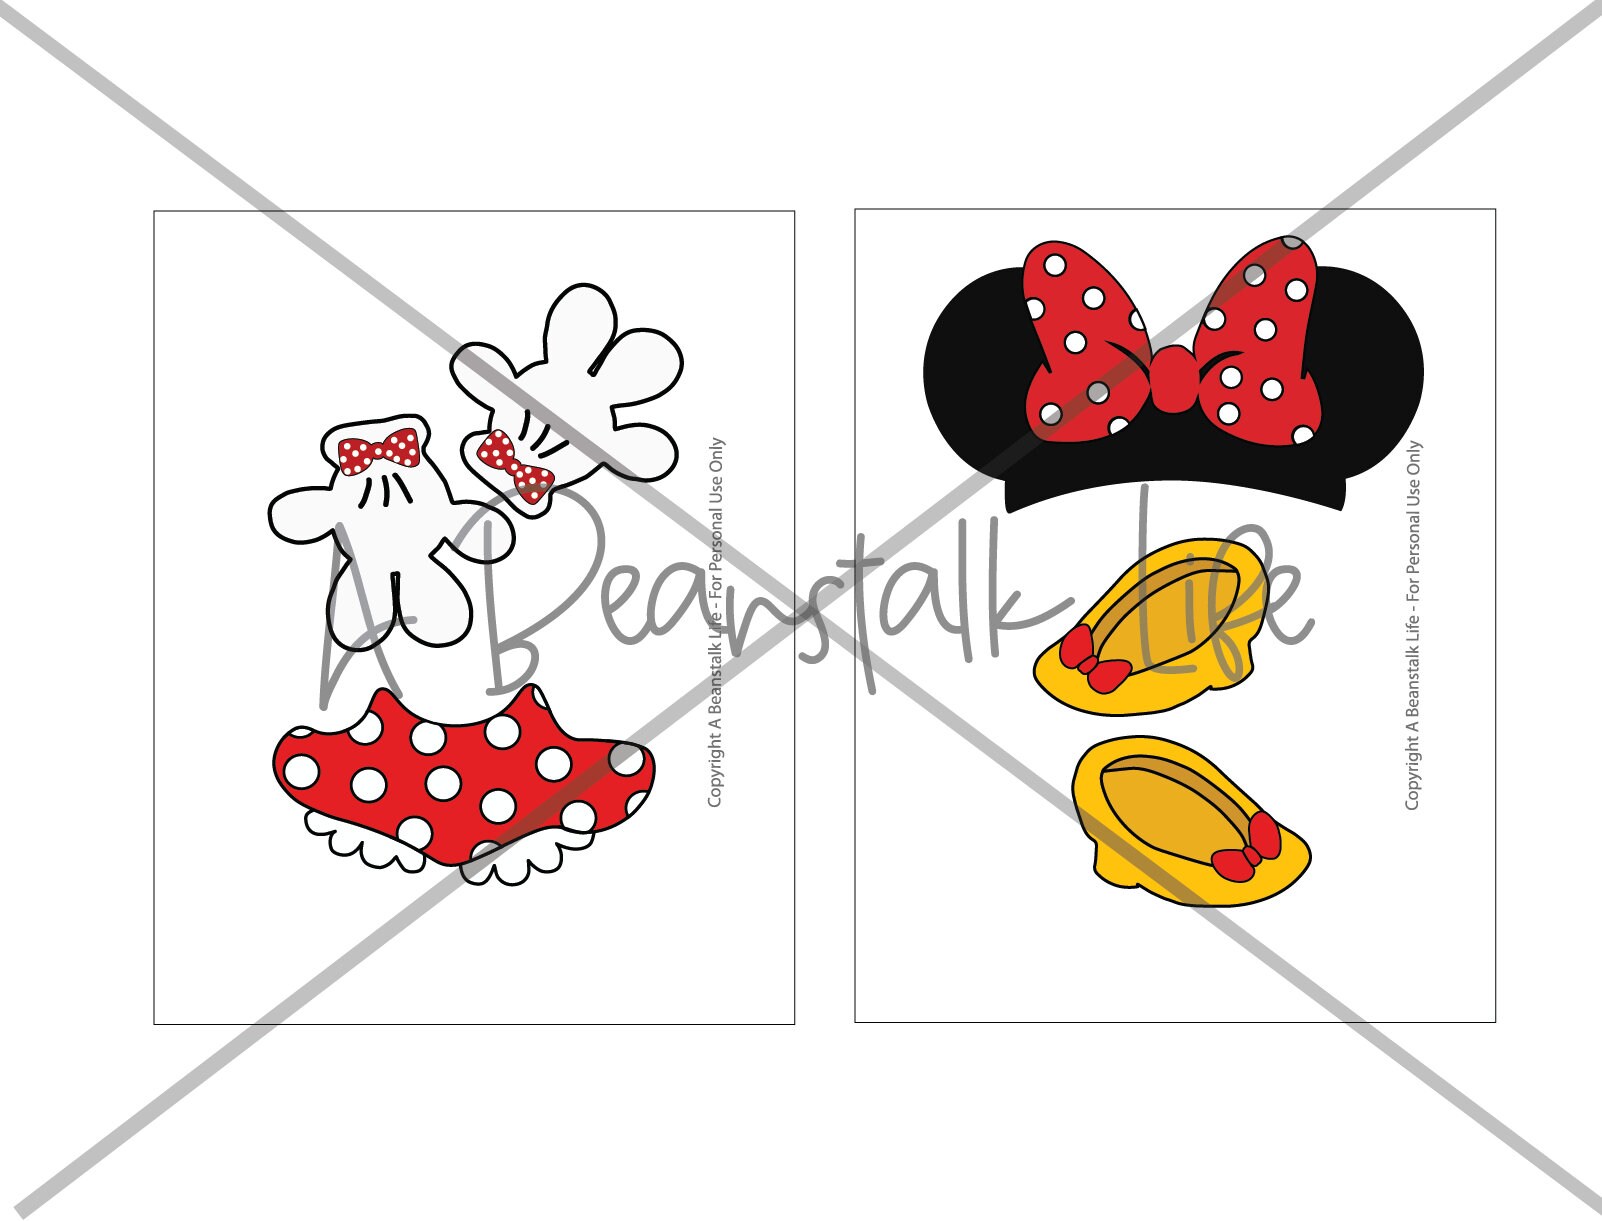 minnie mouse body parts